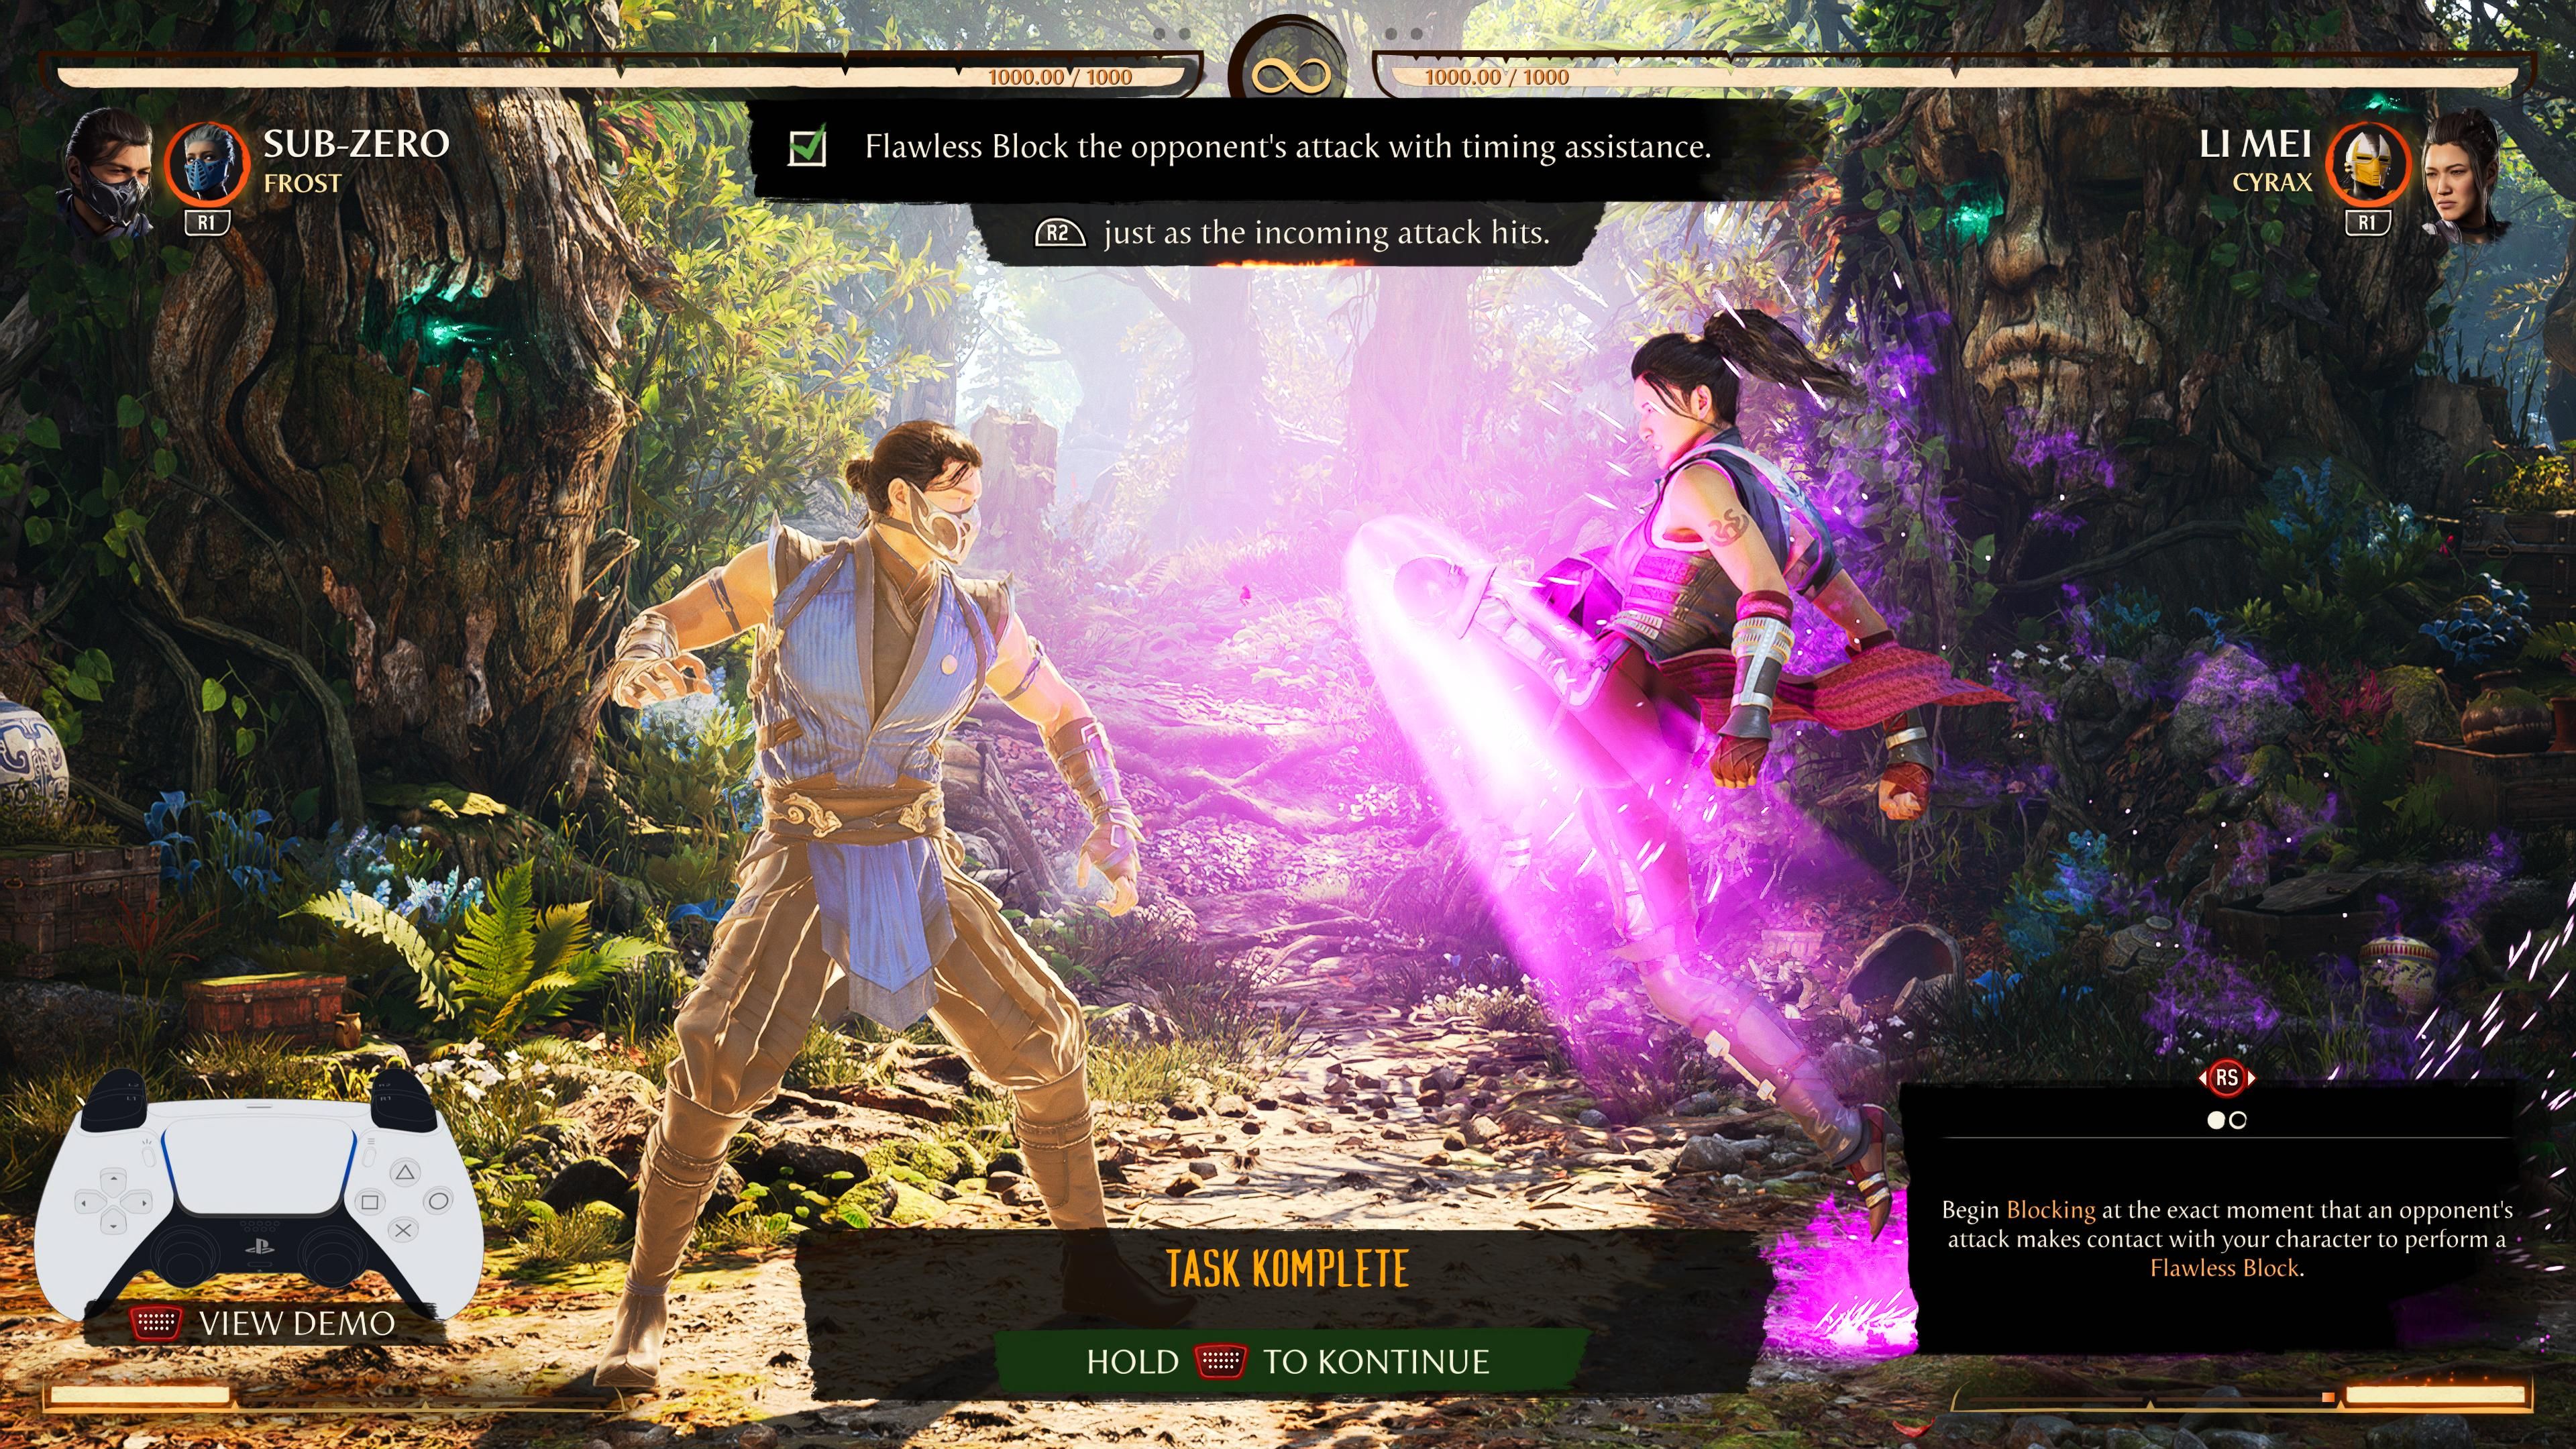 A screenshot showing the tutorial for Flawless Block, with Sub-Zero shining in a yellow aura when Li Mei is about to strike.